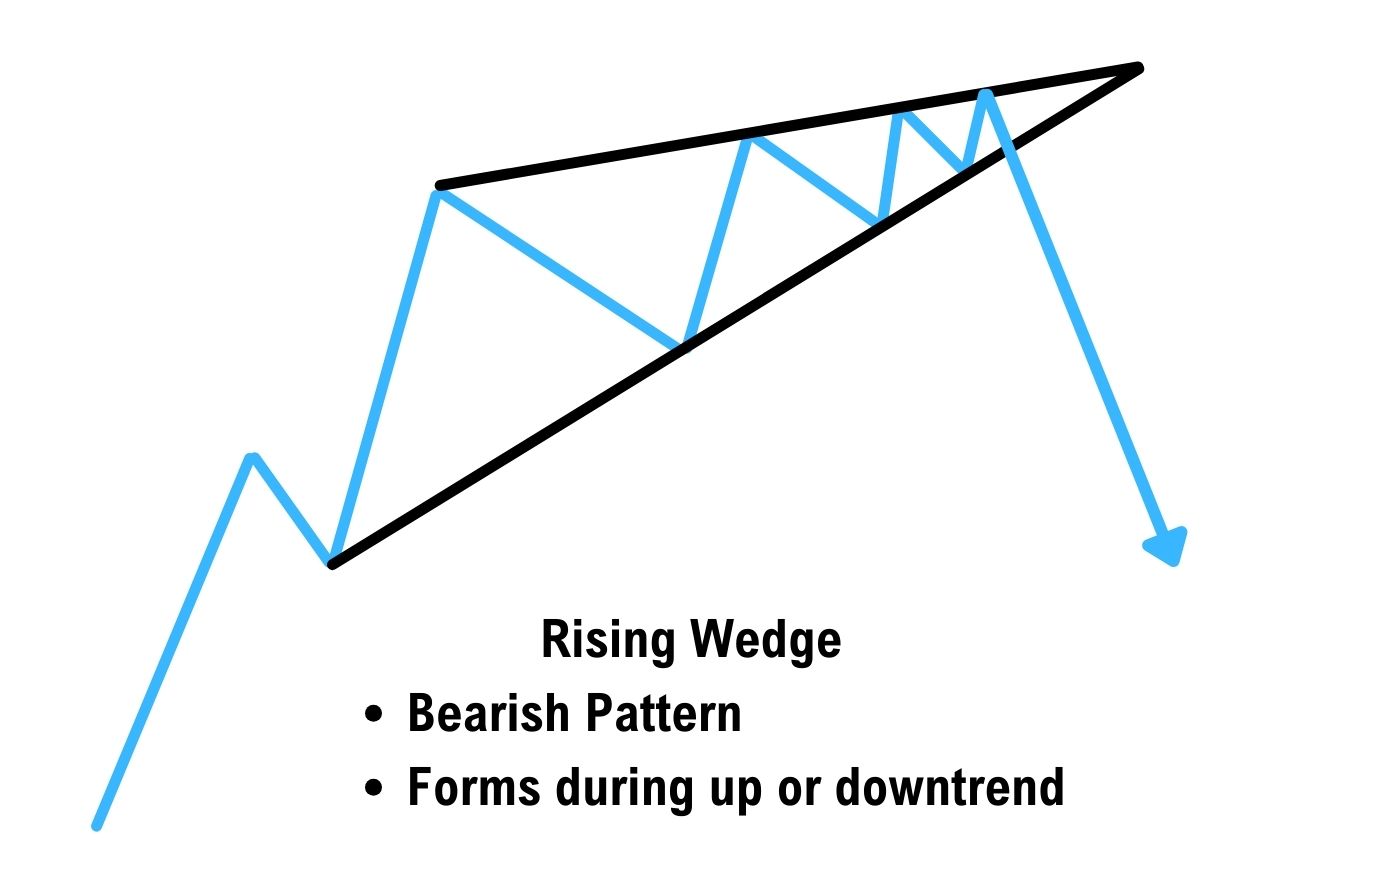 Illustration of a rising wedge in technical analysis.